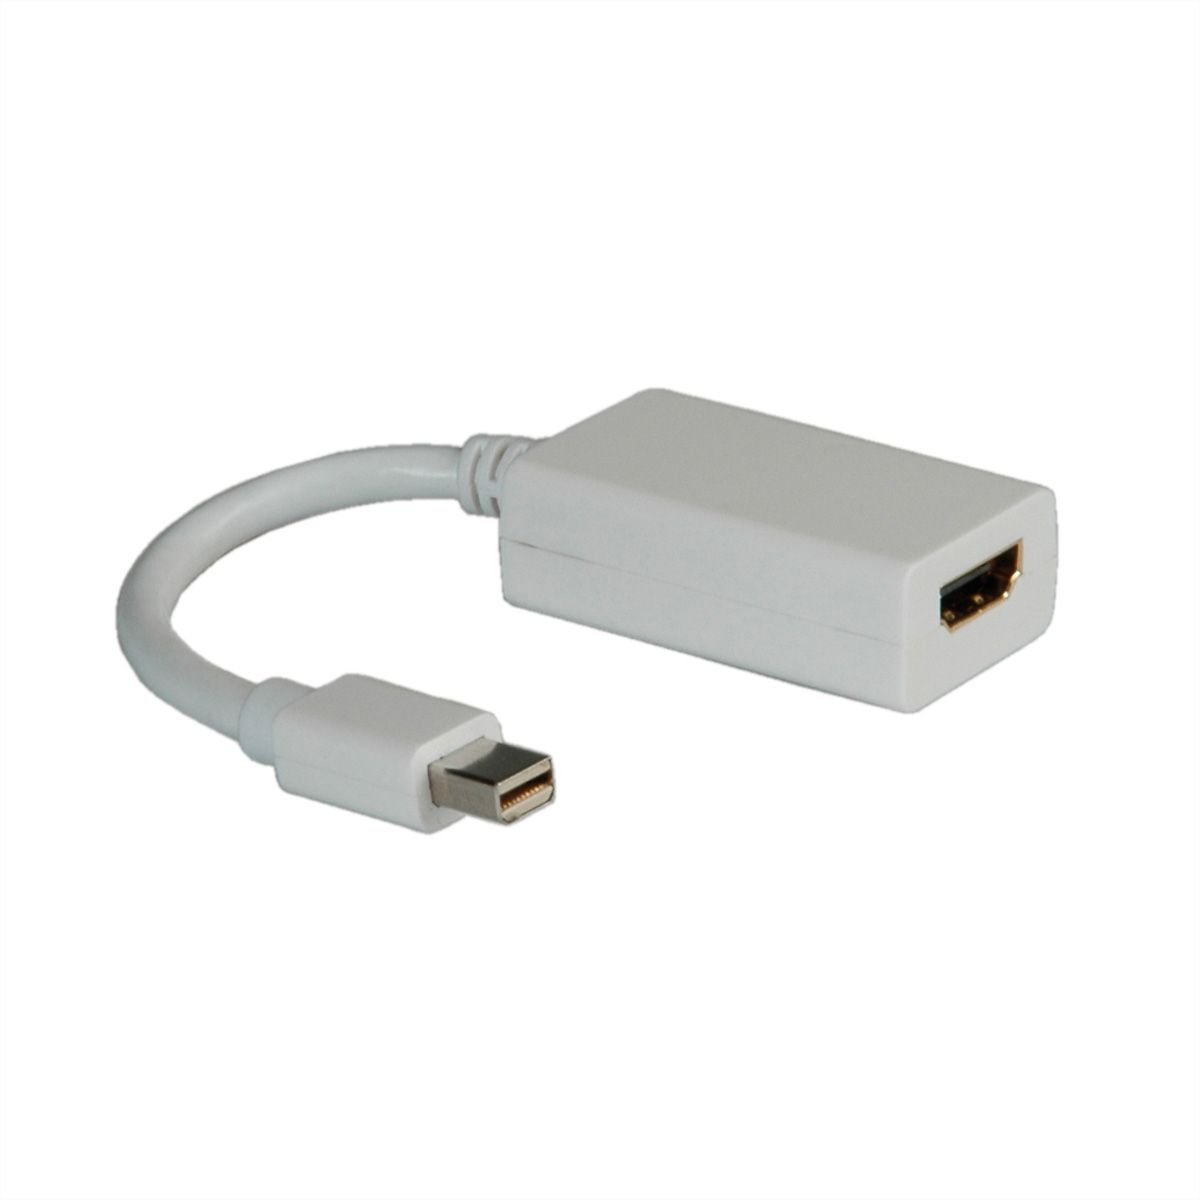 DisplayPort To HDMI Cable -1.8m